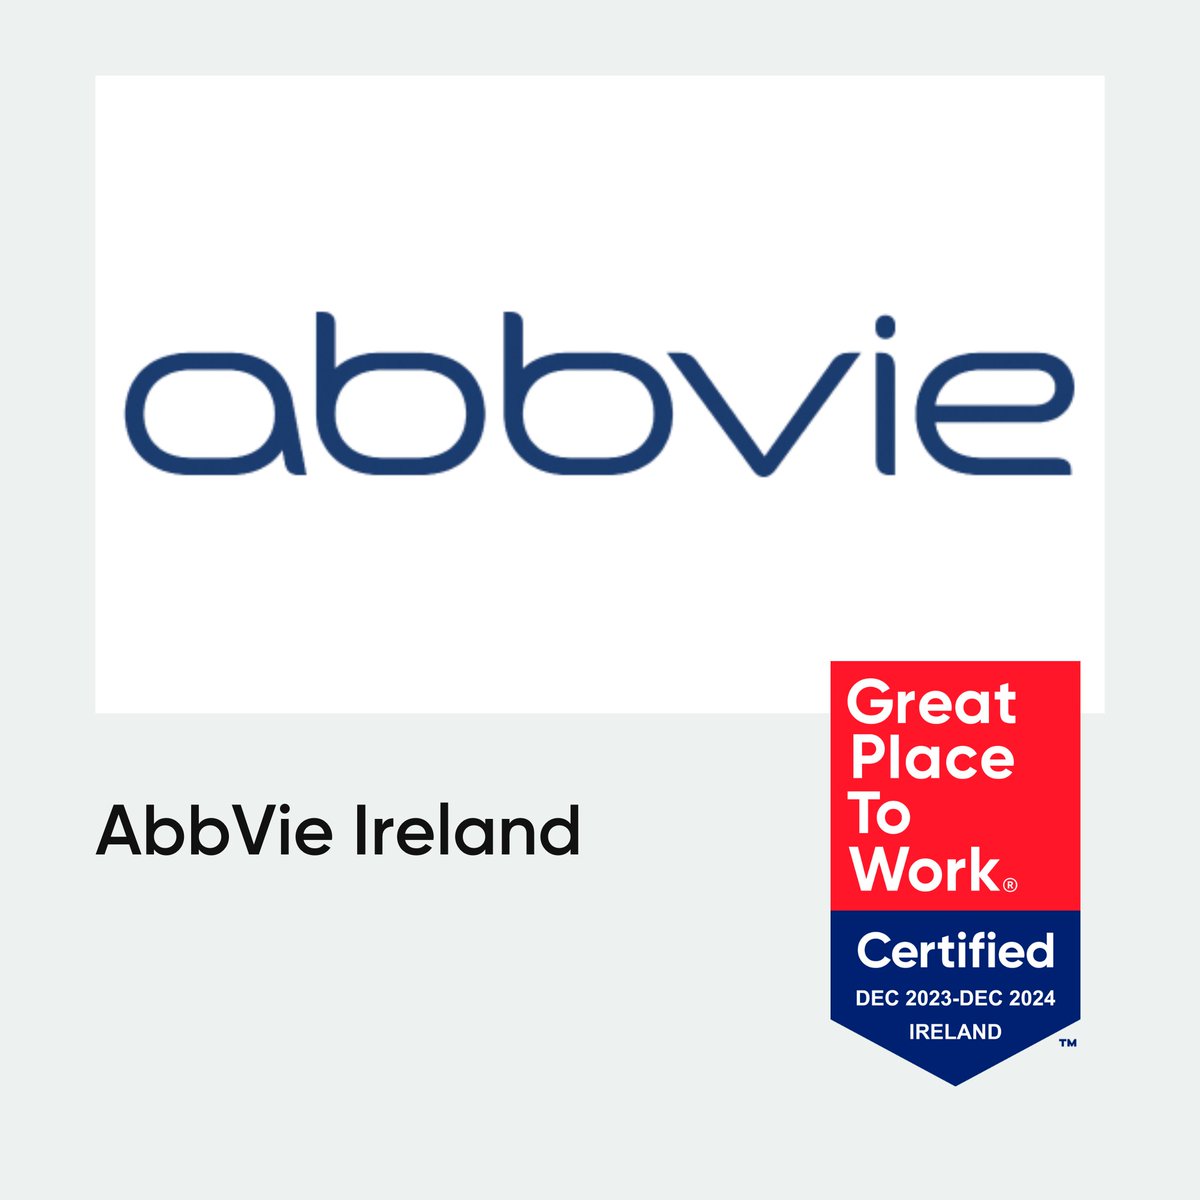 CERTIFICATION 🏅| Congratulations to @AbbVie Ireland for being Certified™ as a #greatplacetowork again! Well done to the team for this amazing achievement! 

Check out their Great culture 👉hubs.li/Q02hZrzX0

#gptw #gptwcertified #certifiedgreat